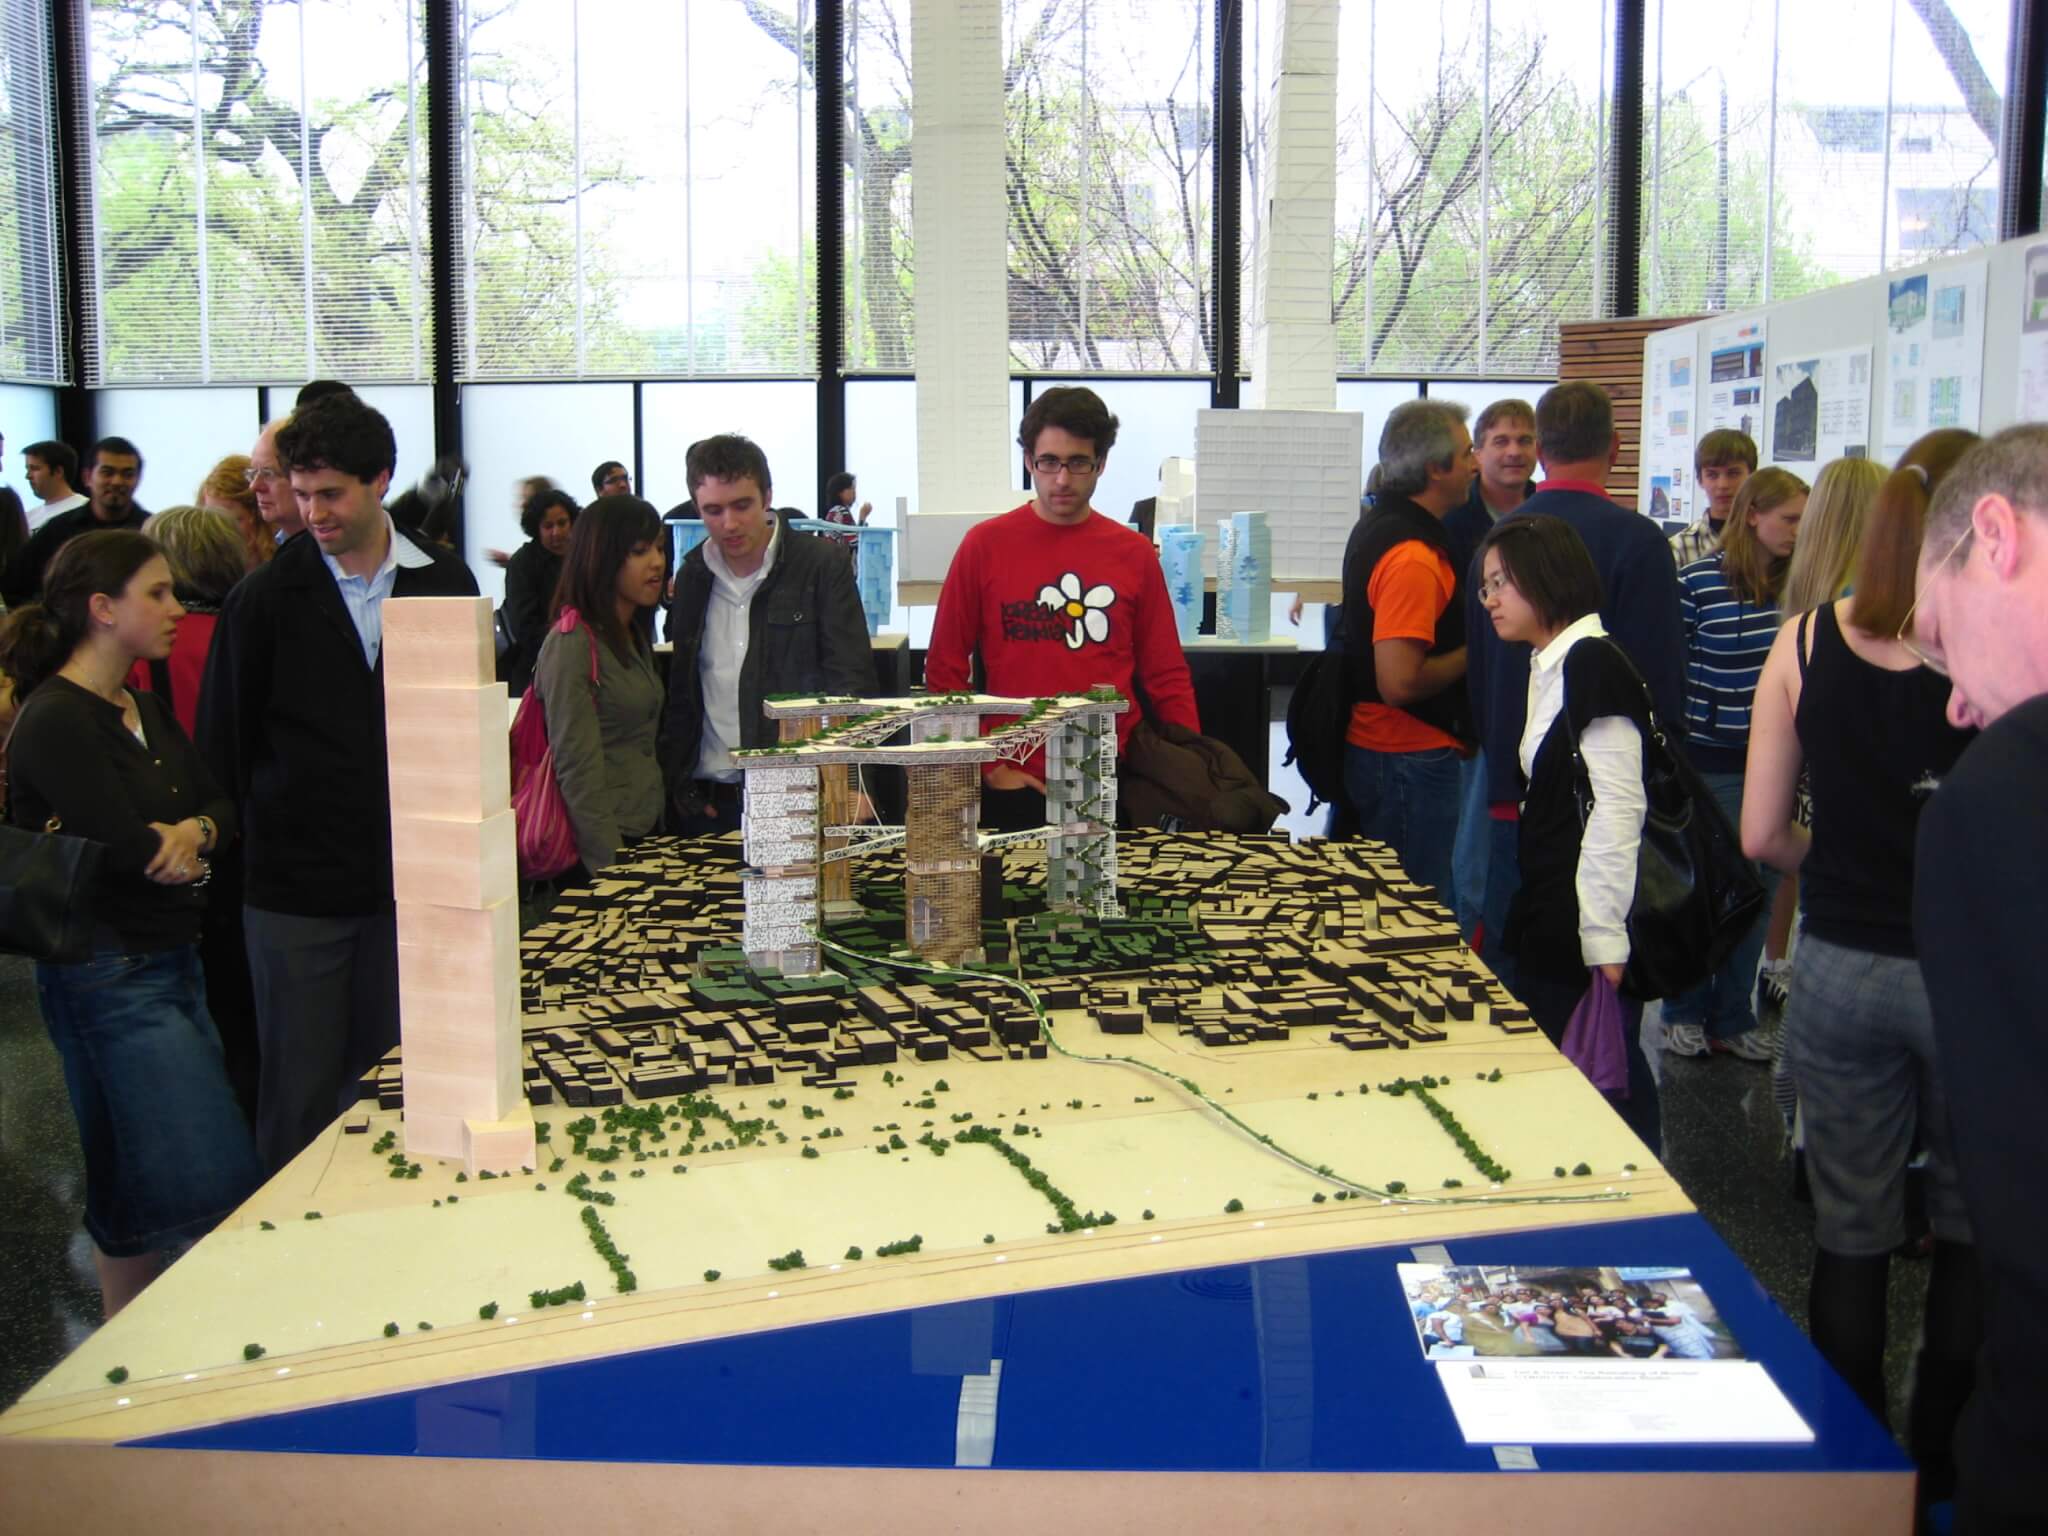 people mill around an architectural model at an exhibition